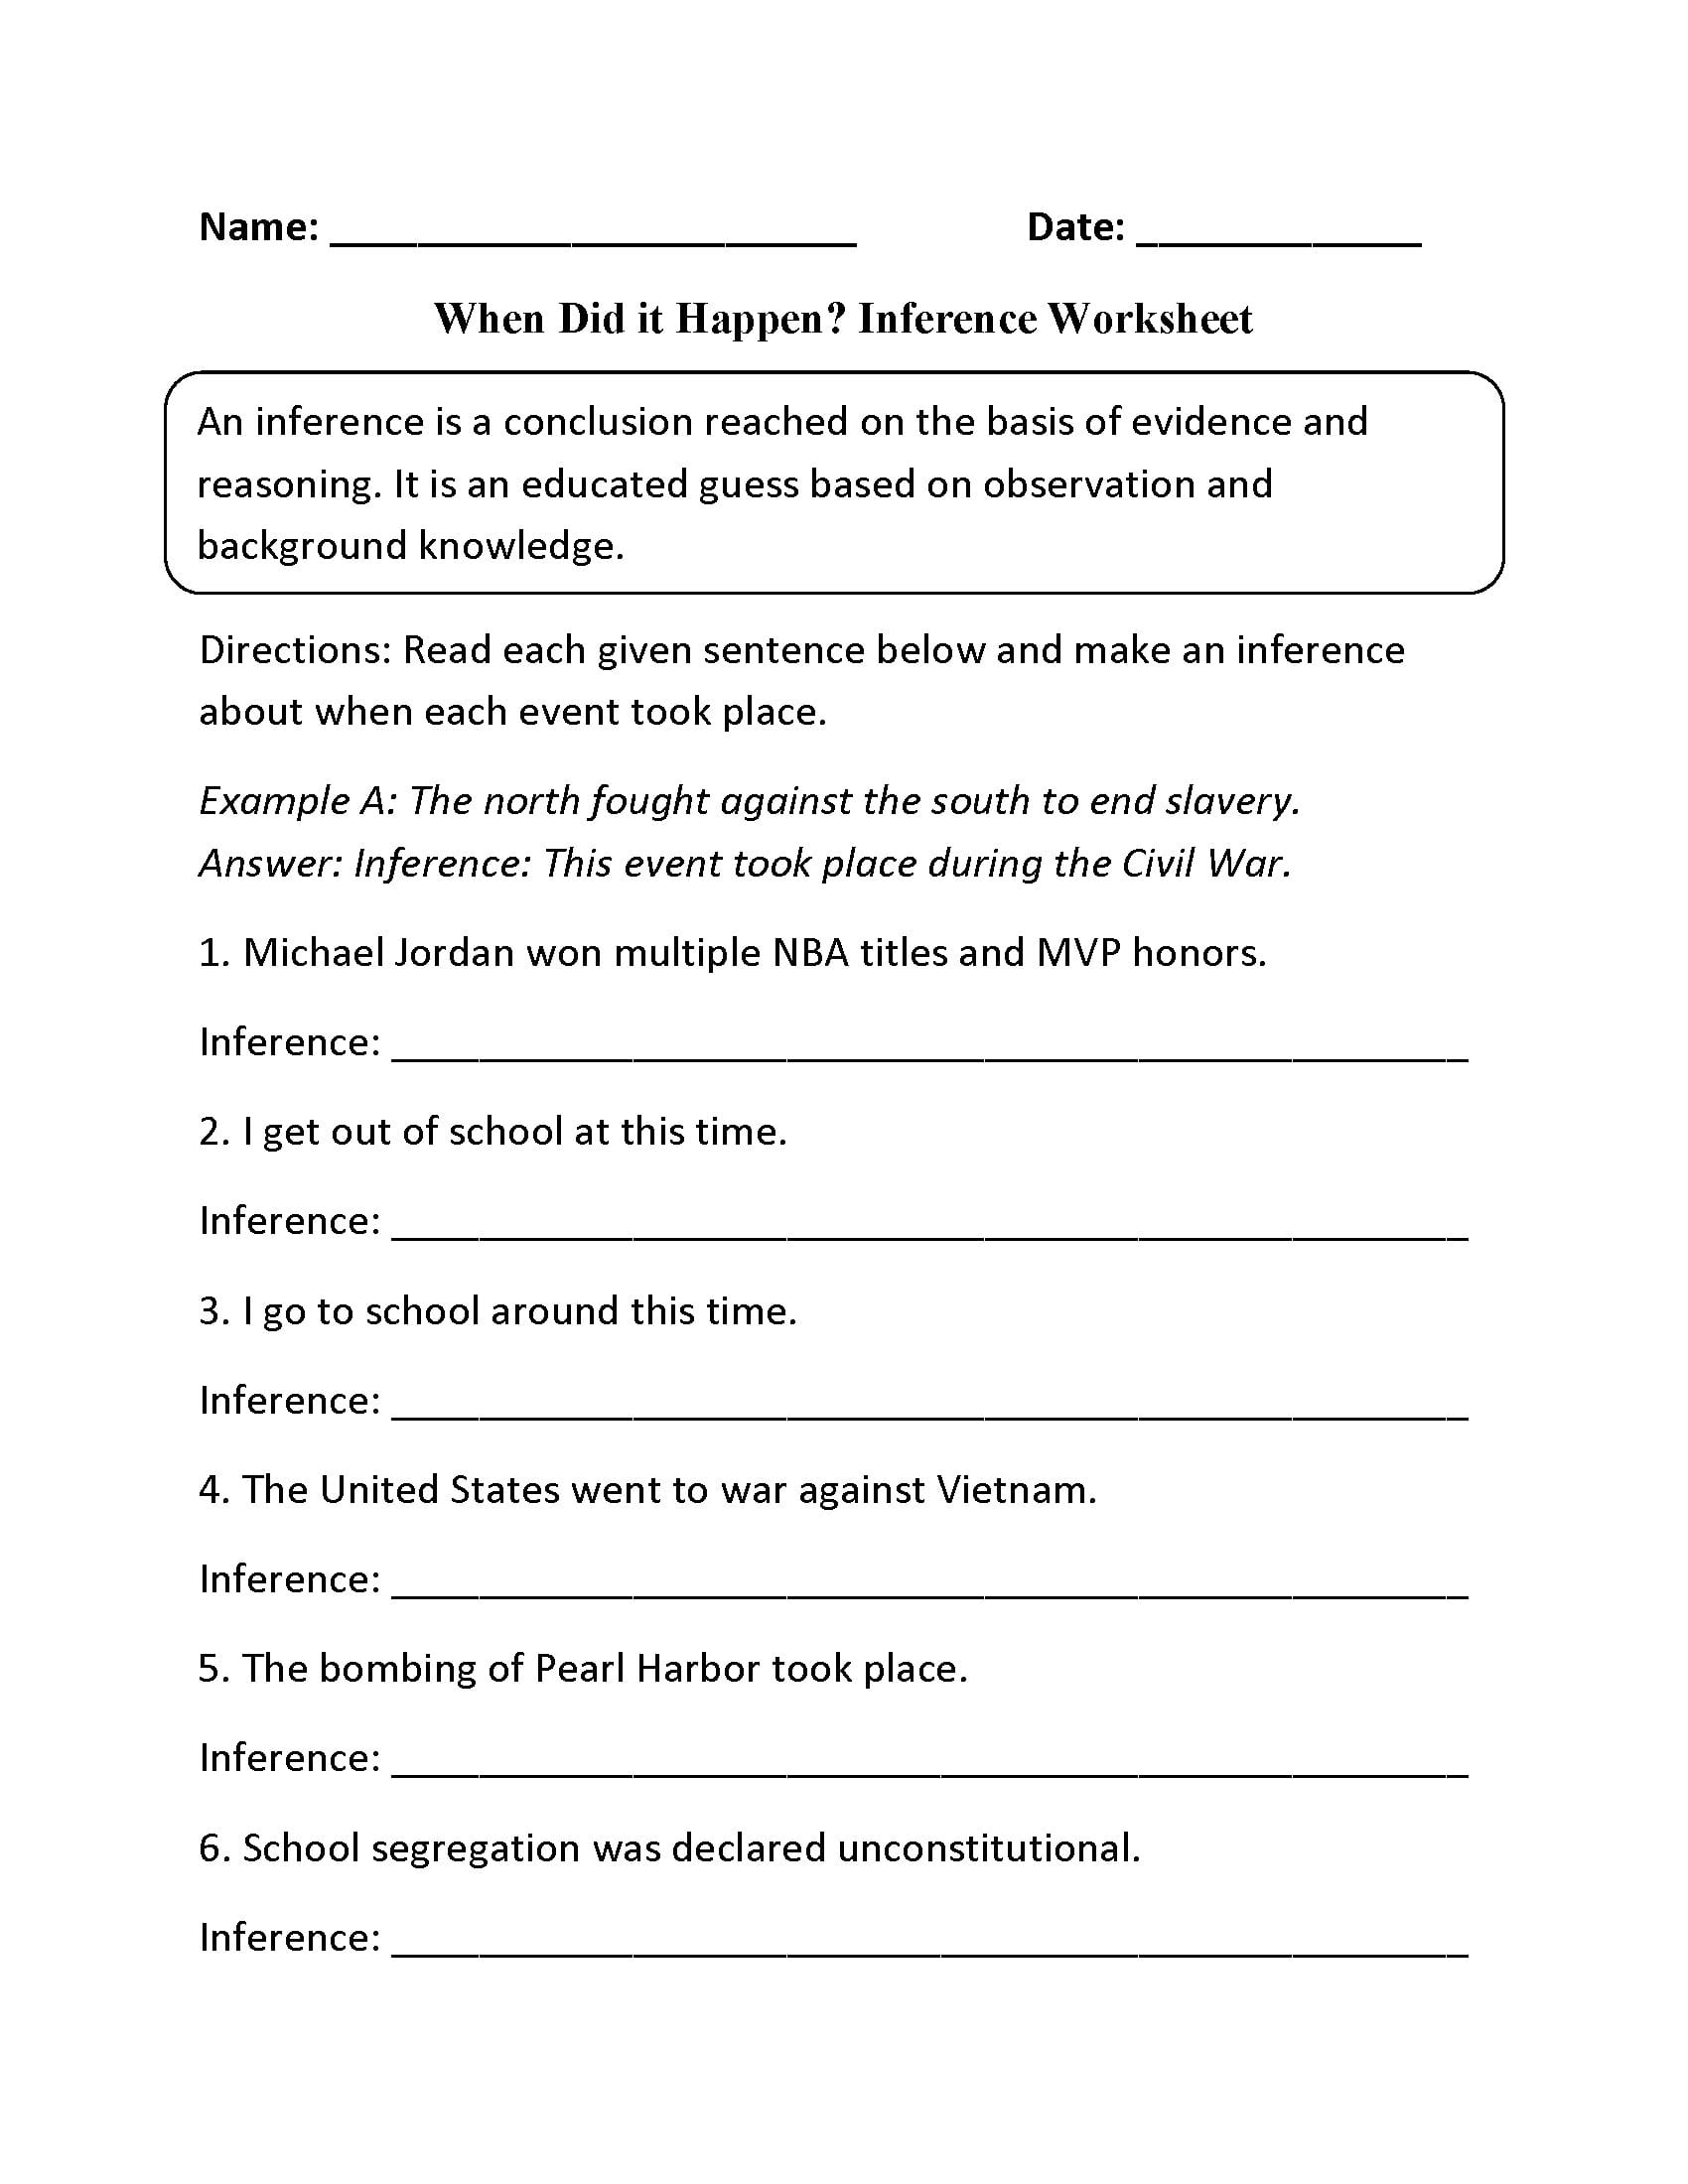 Reading Worksheets  Inference Worksheets As Well As Inference Worksheets Grade 4